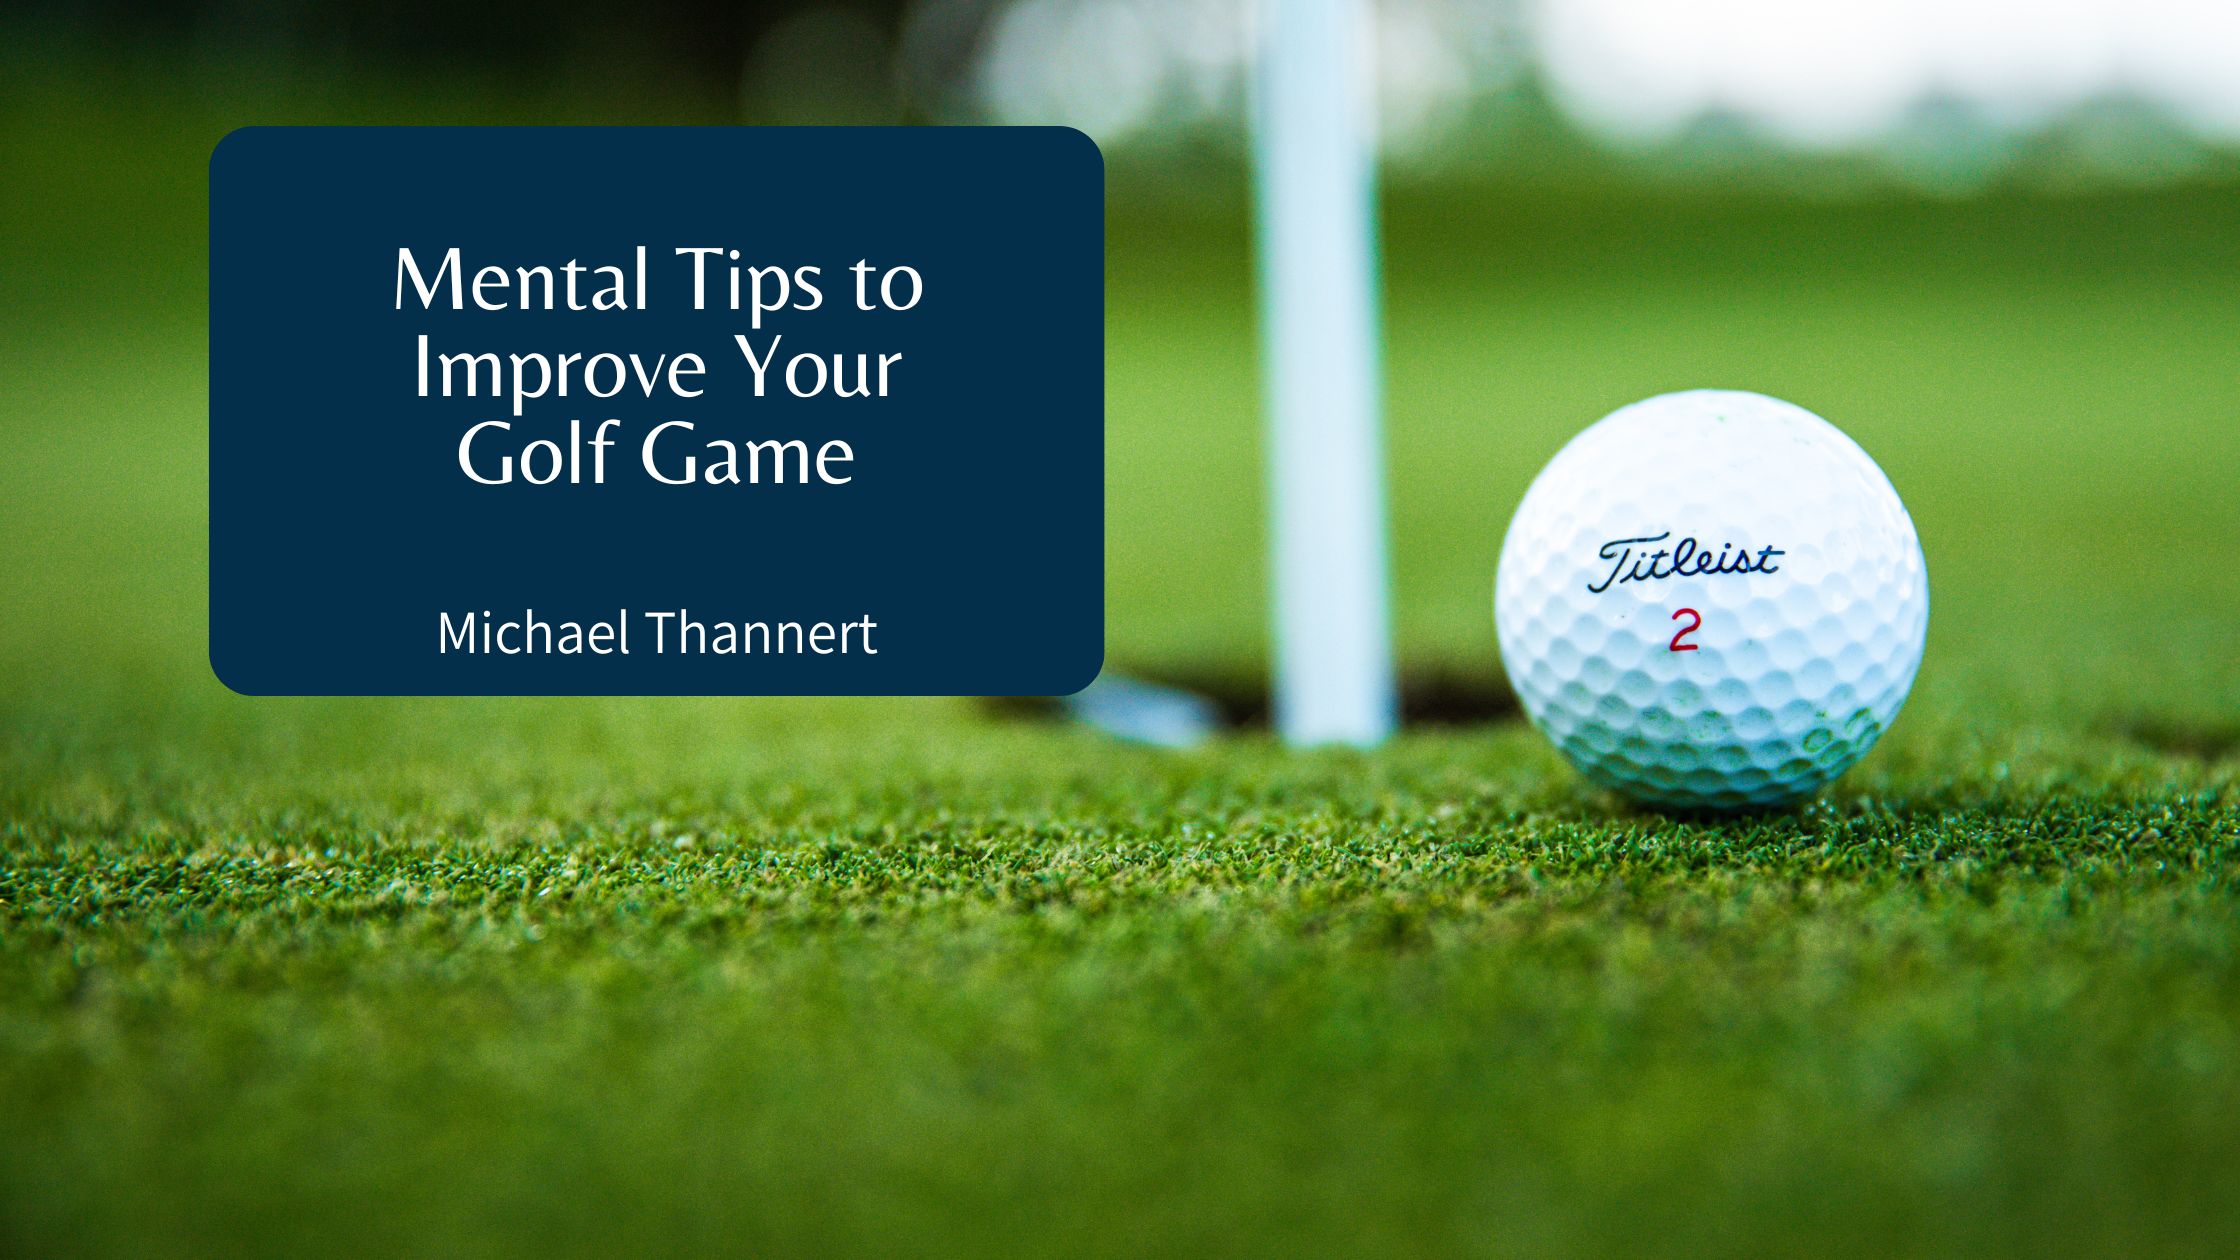 Mental Tips to Improve Your Golf Game